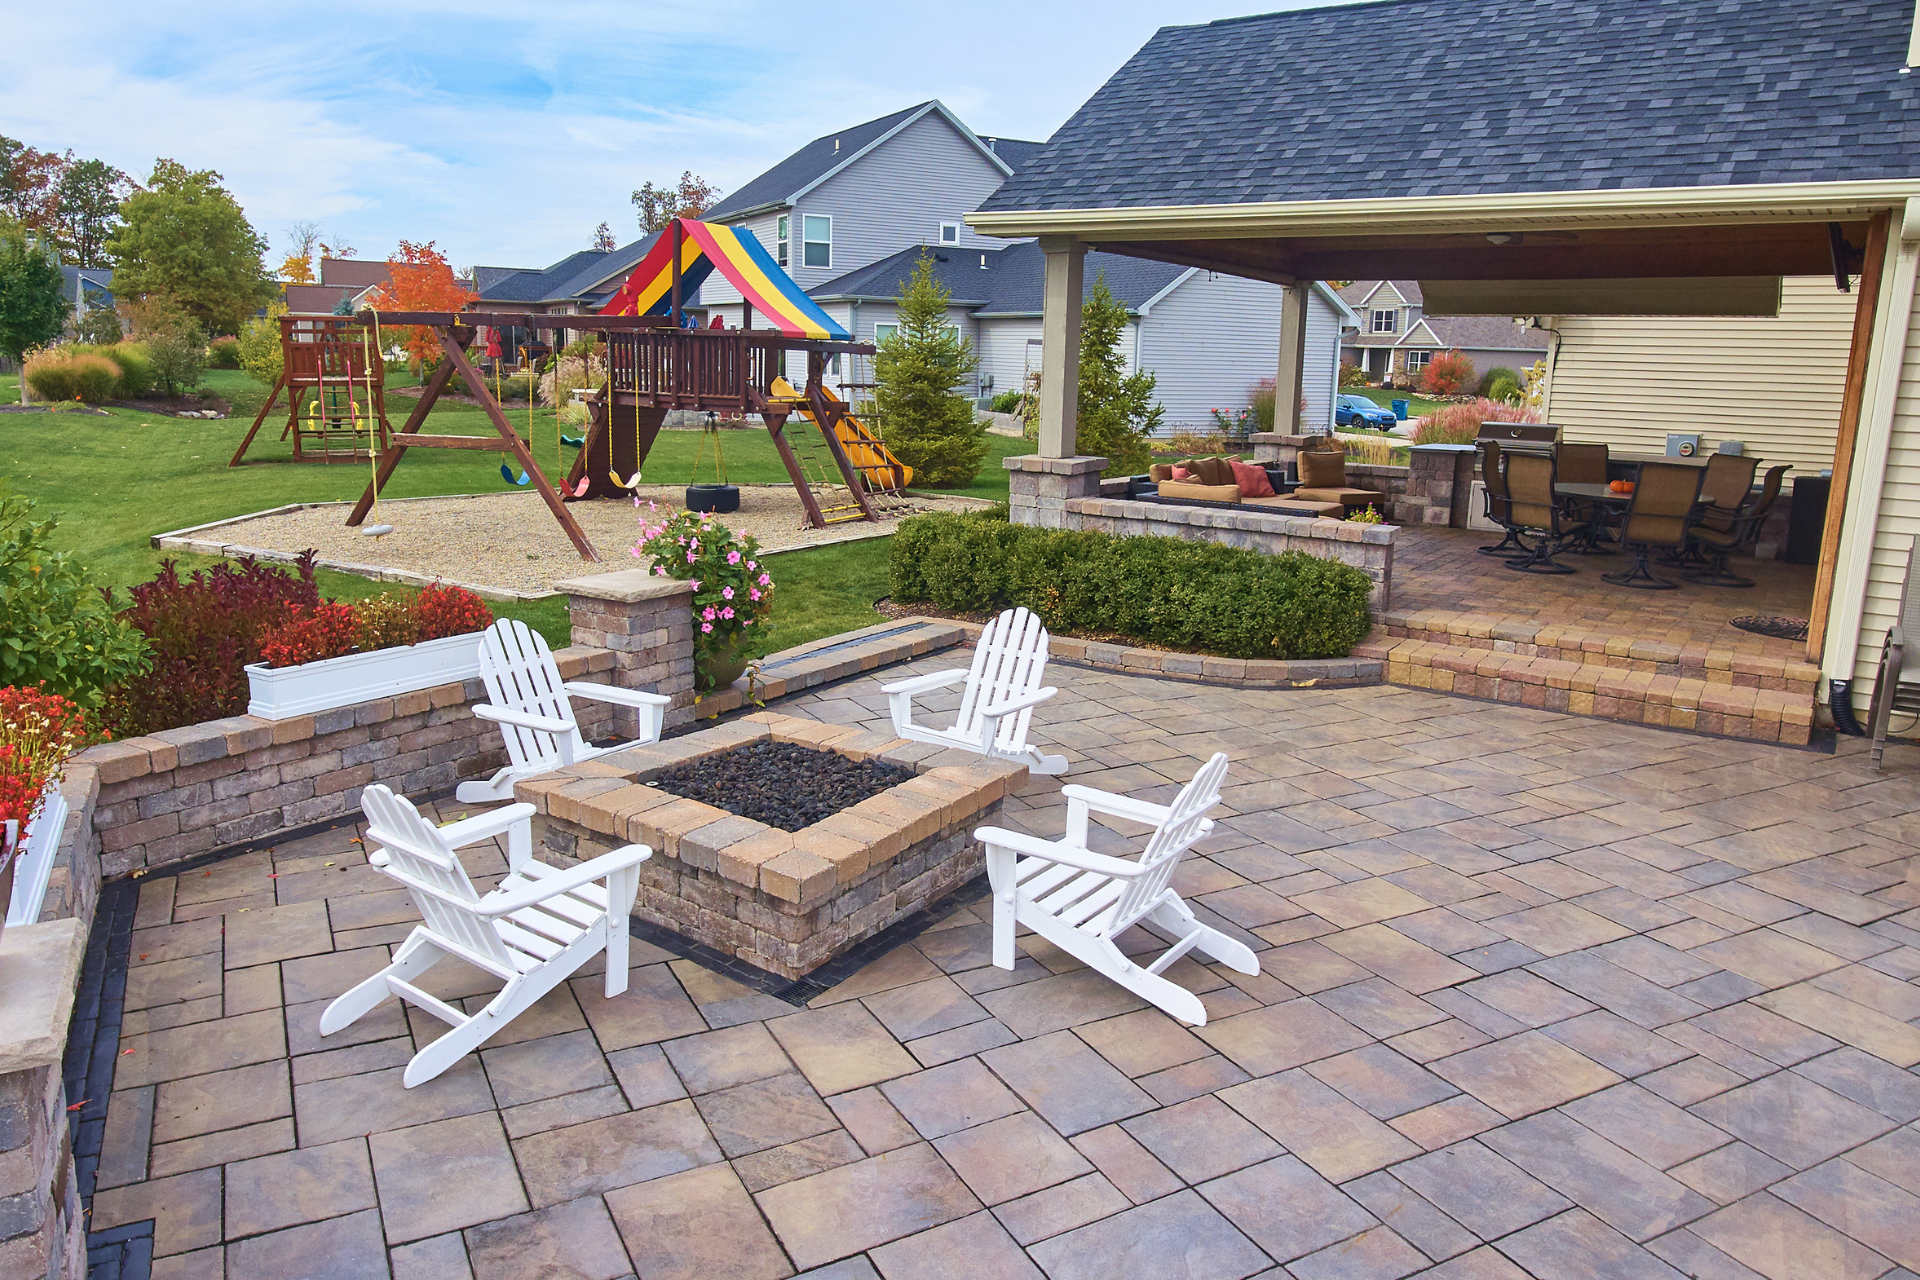 A patio with a fire pit and chairs and a playground in the background.